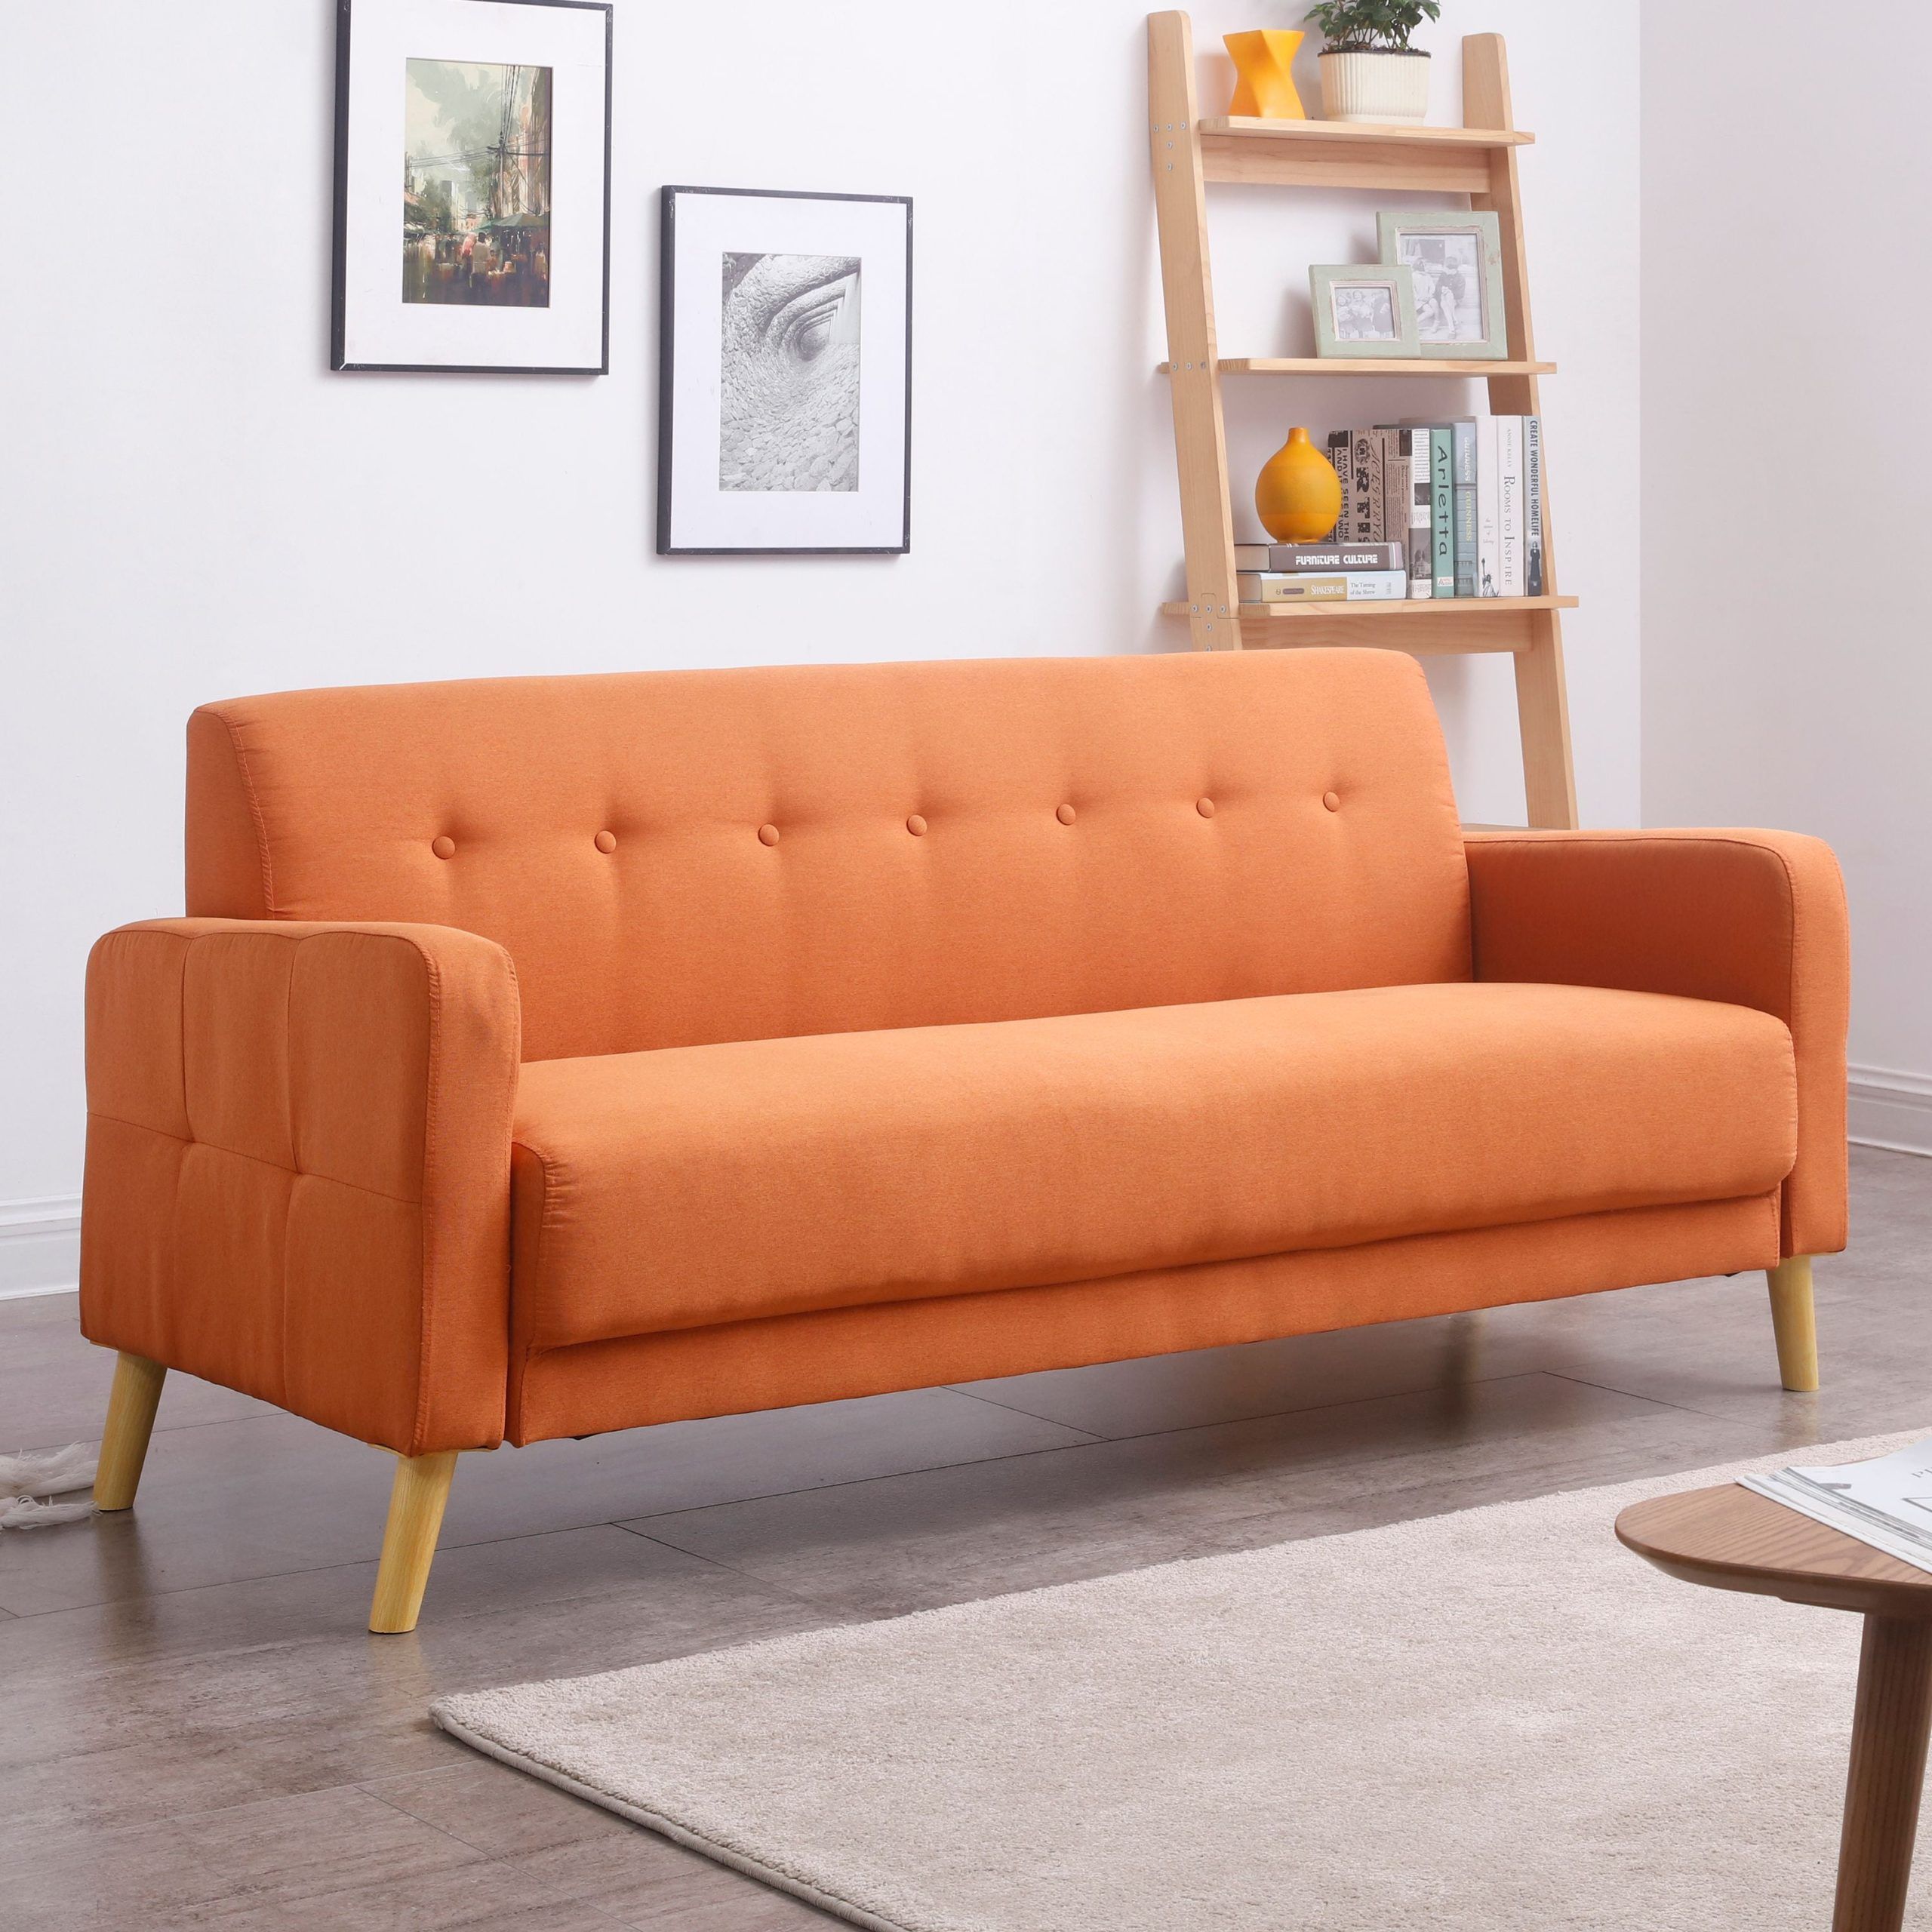 Mid Century Modern Sofa With Stylish Button Tufted Back And Single In Mid Century Modern Sofas (Gallery 1 of 20)